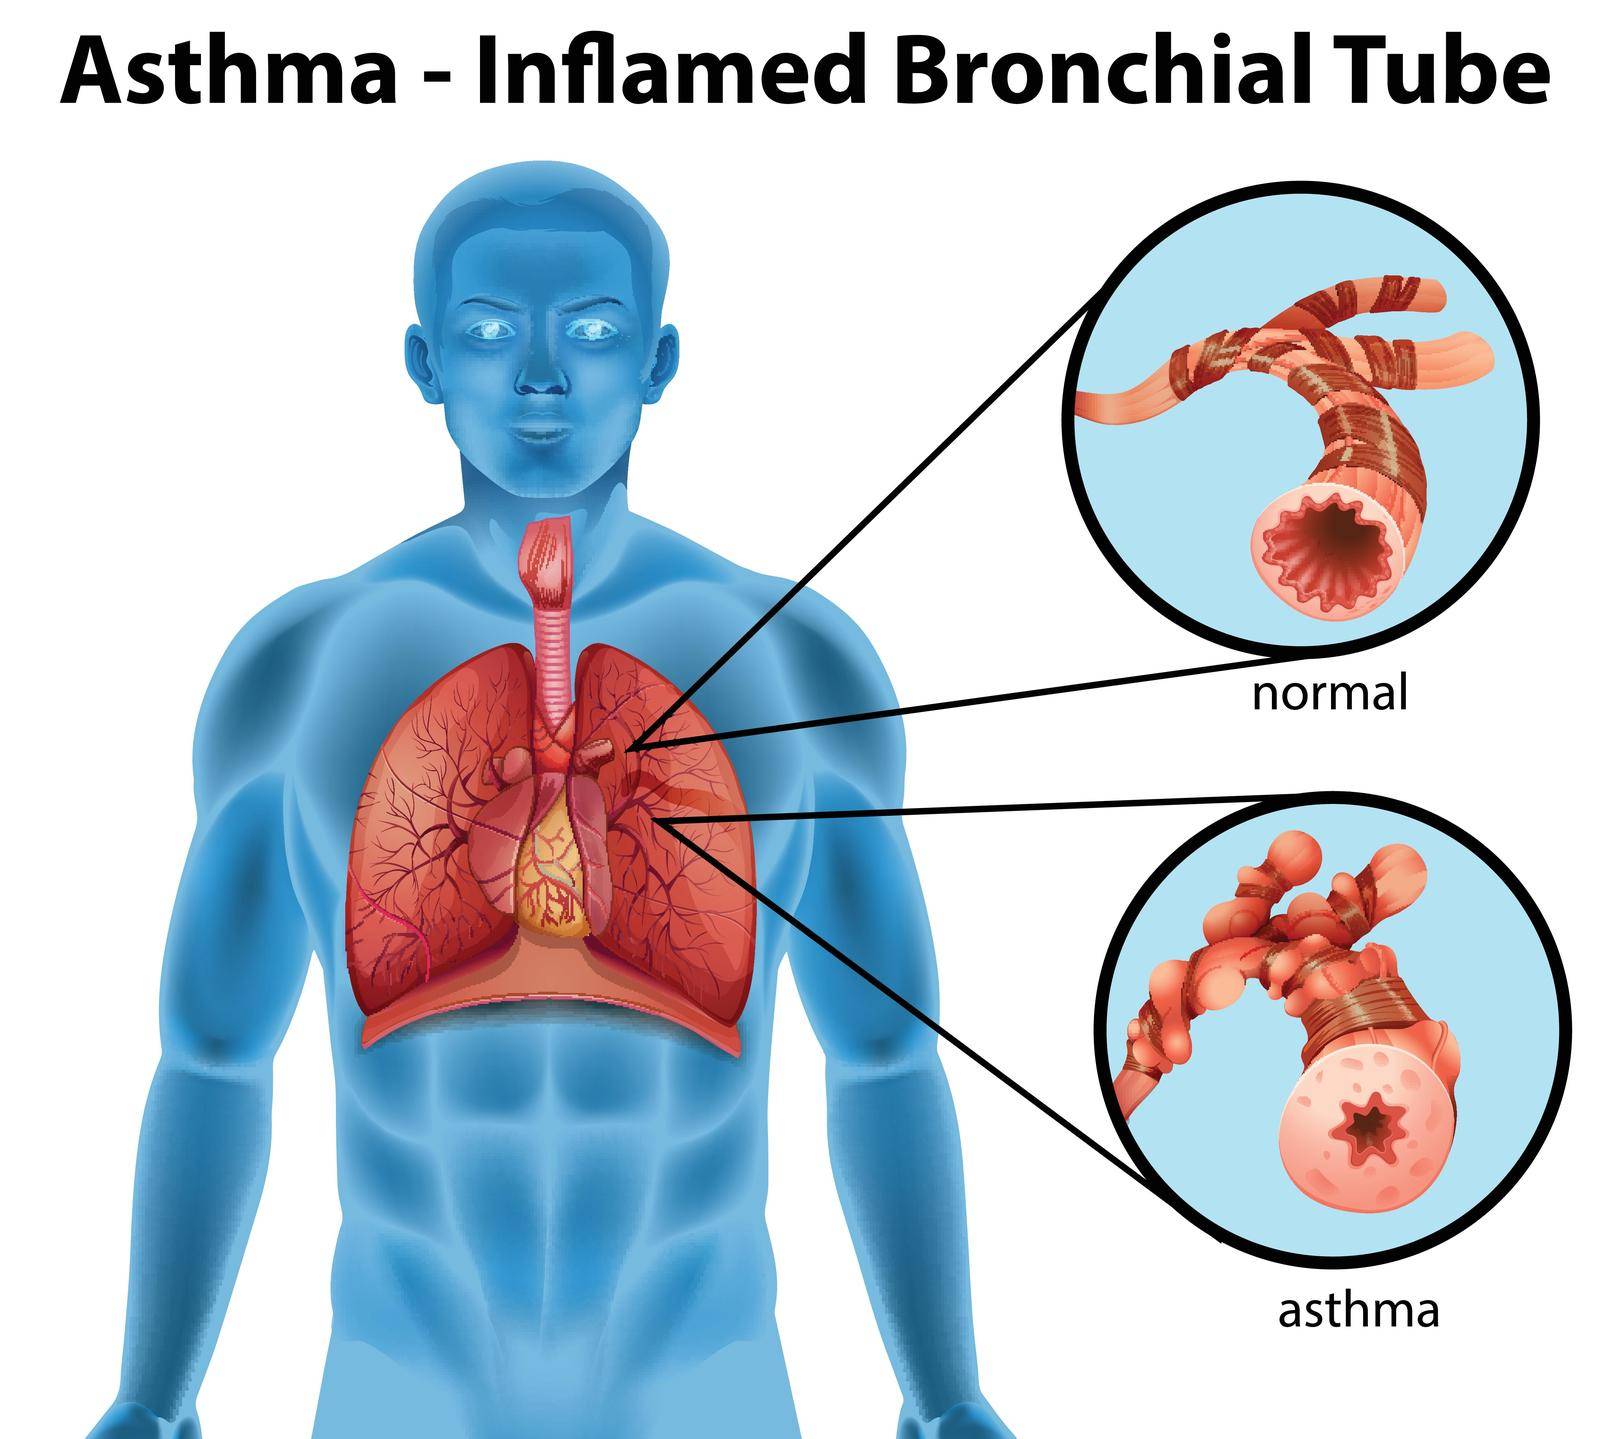 Asthma-inflamed bronchial tube by iimages